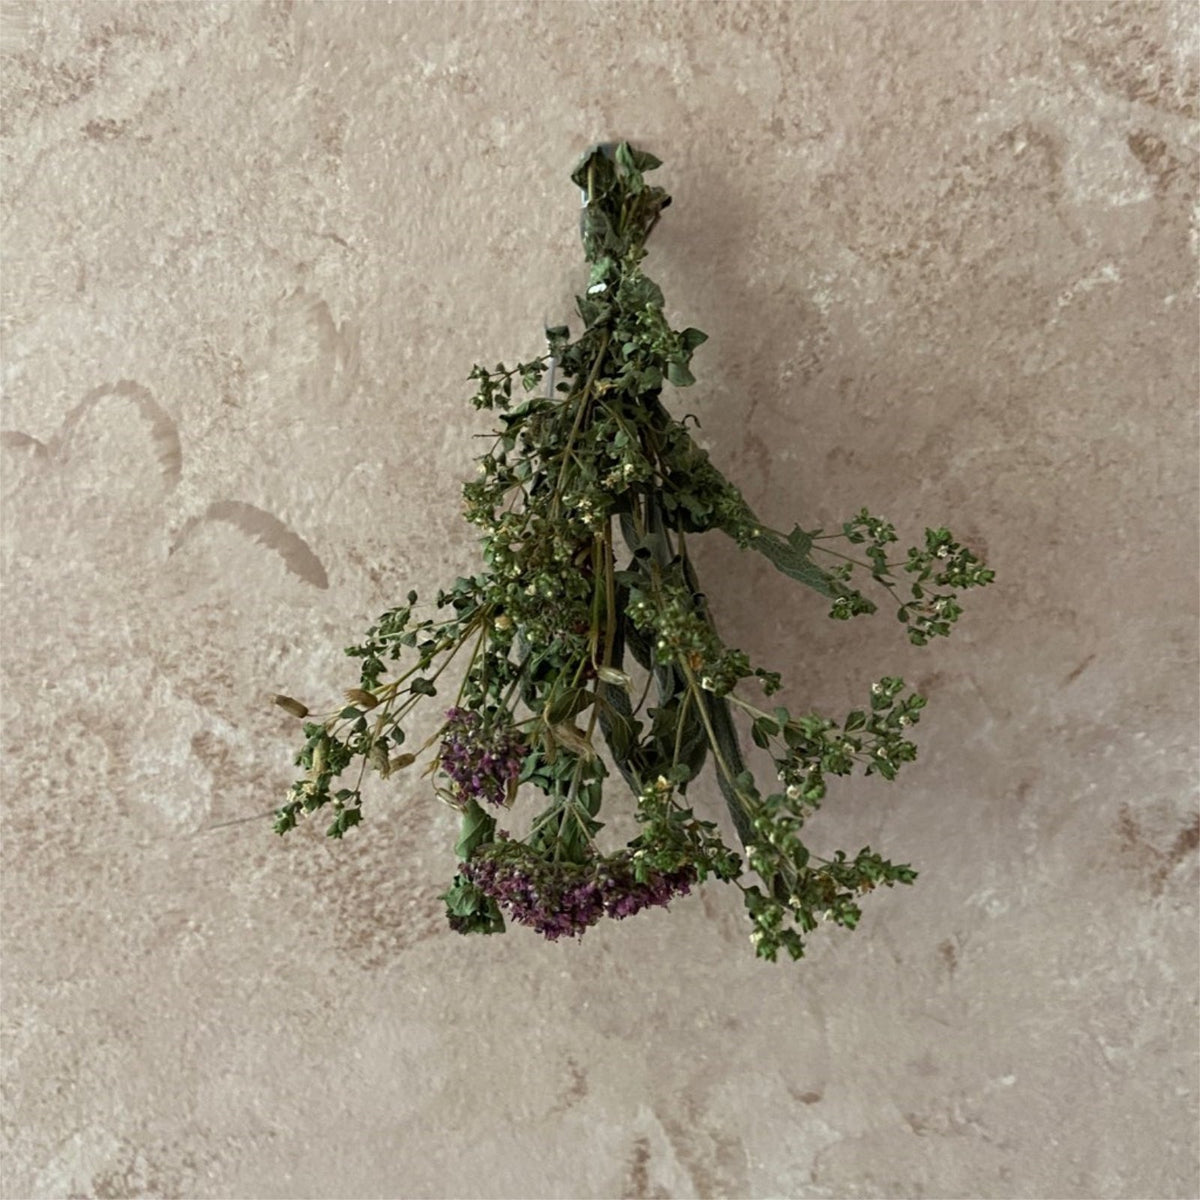 Garden Witches Herb Bundle | Spell Crafting Herbs from 13 Moons